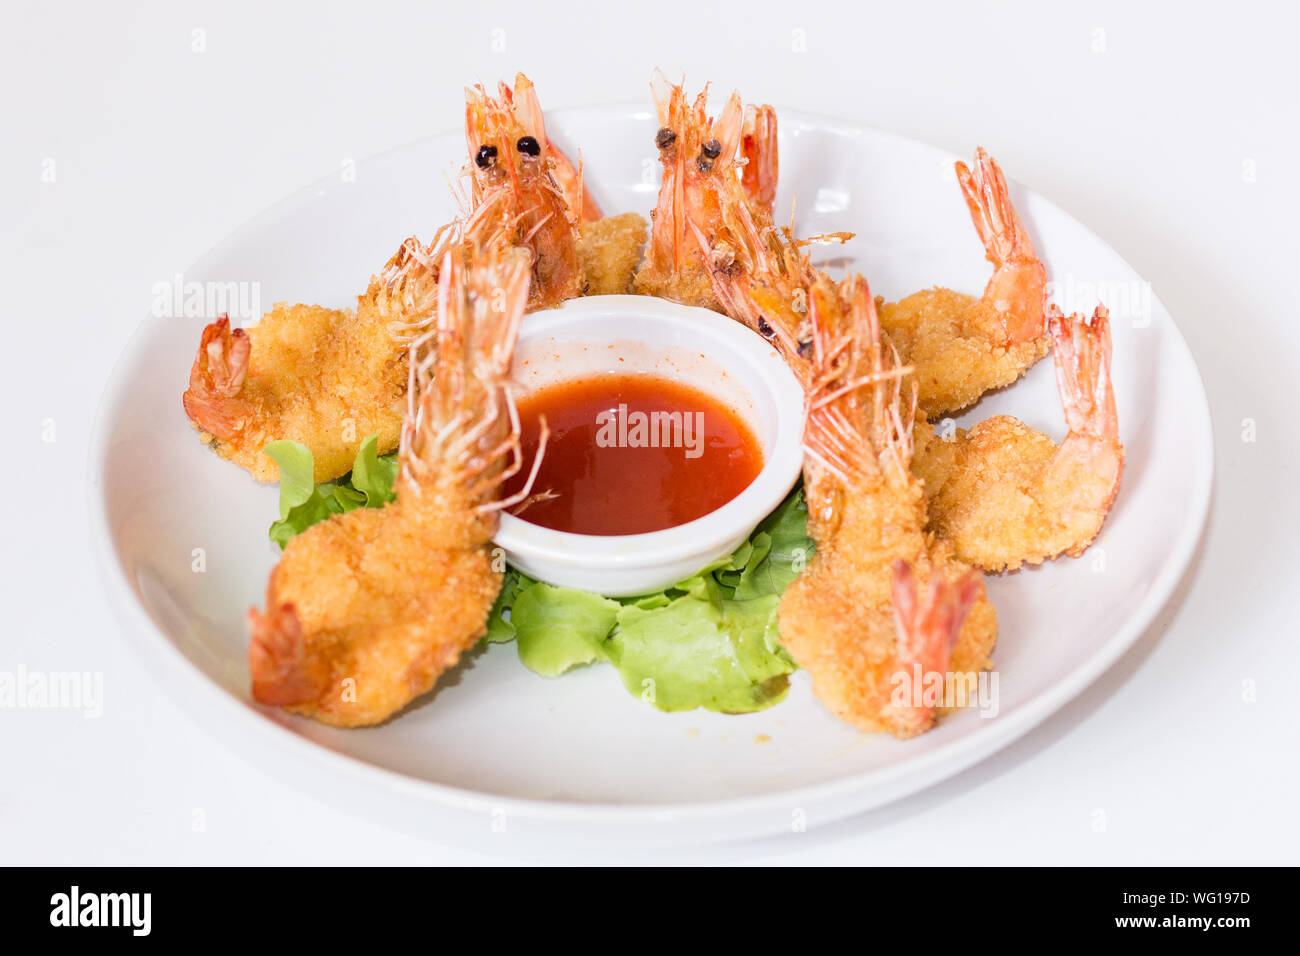 High Angle View Of Prawns Served In Plate Stock Photo